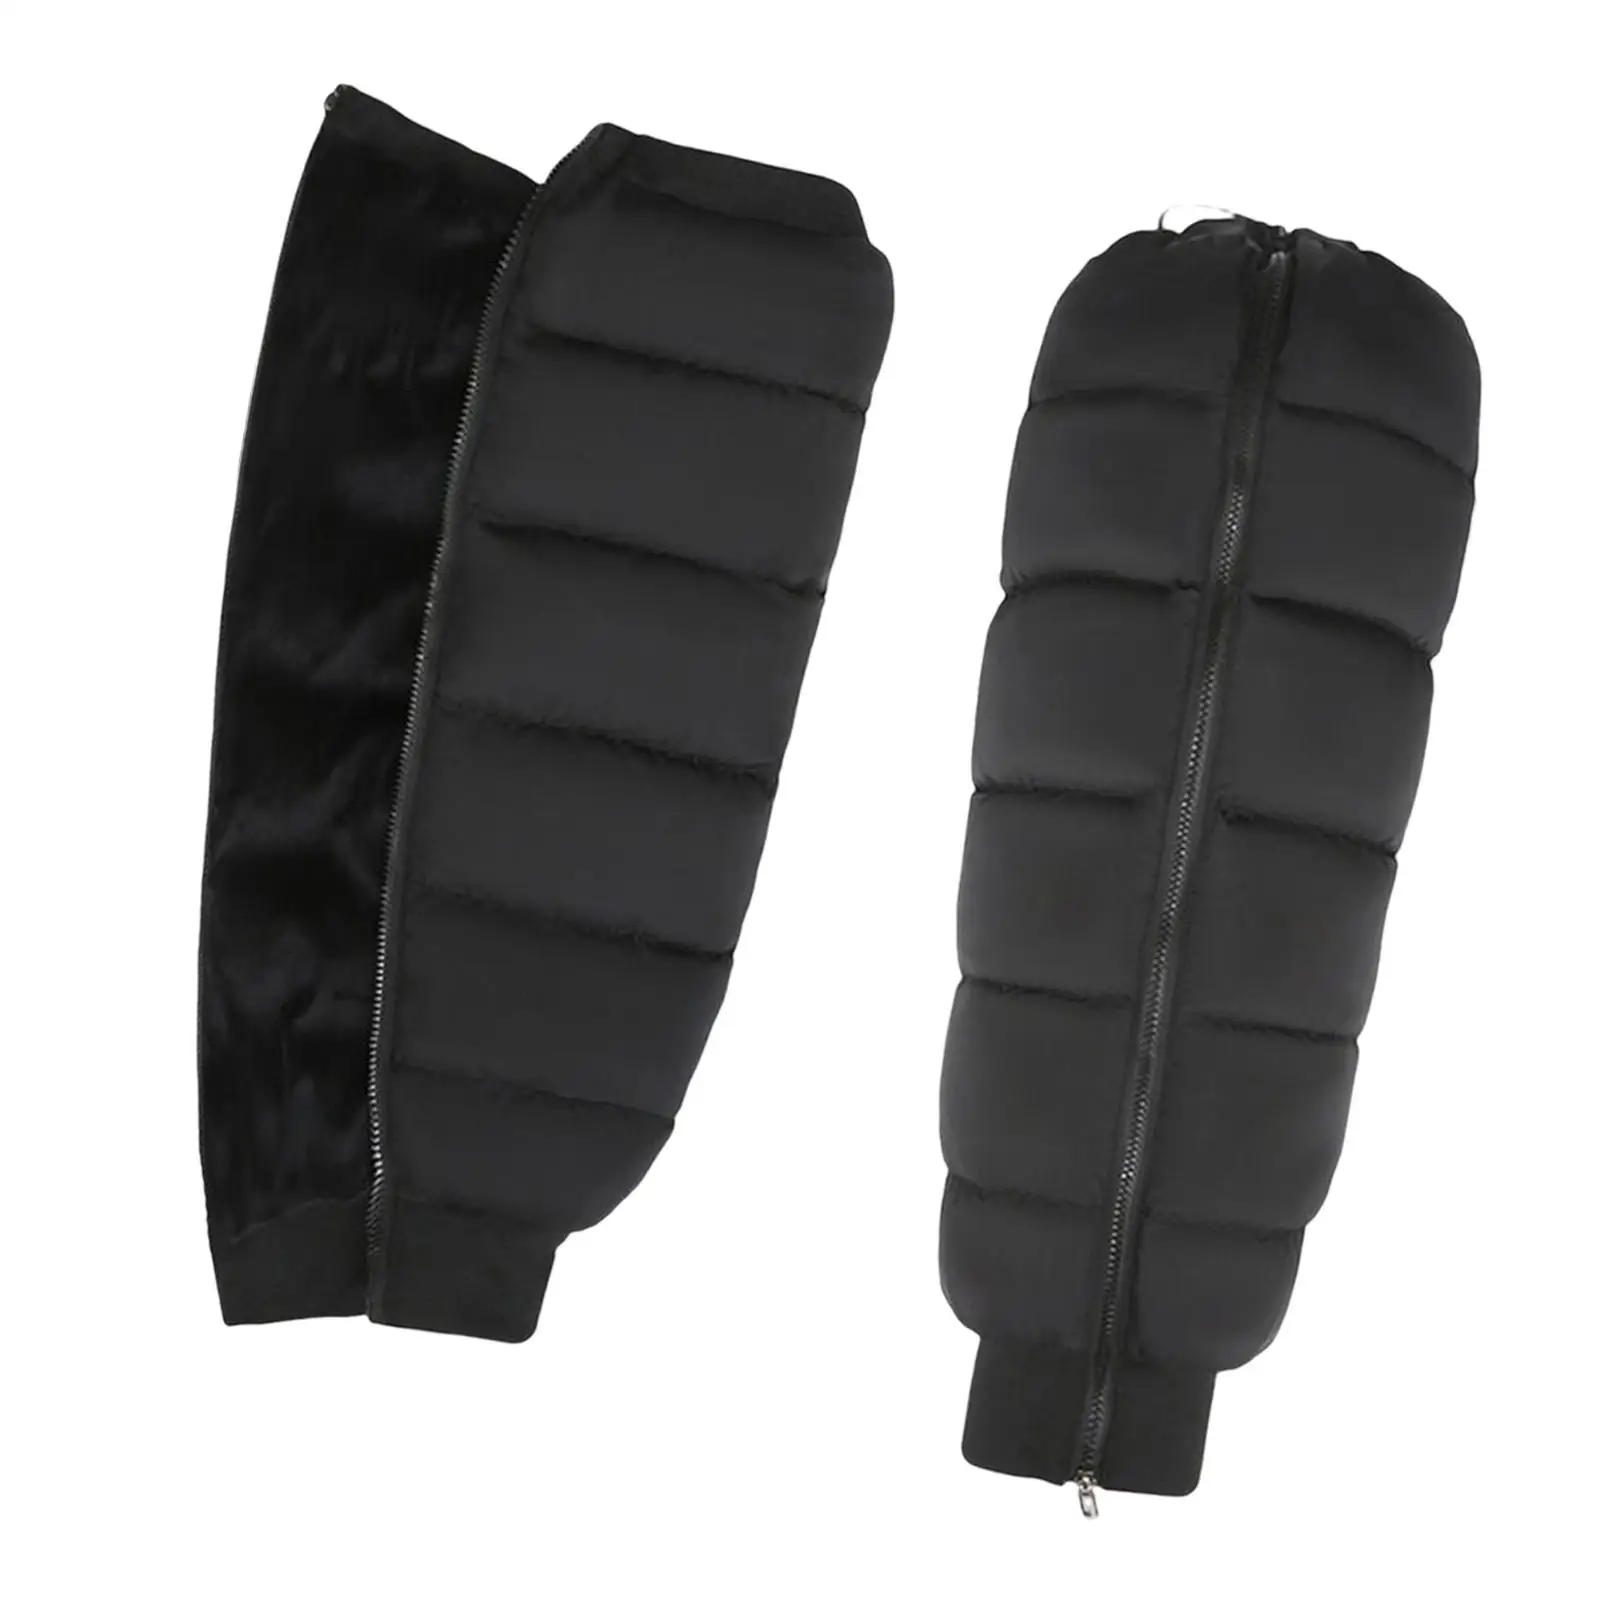 1 Pair Winter Knee Pads Protective Gear Windproof Protector for Riding Cold